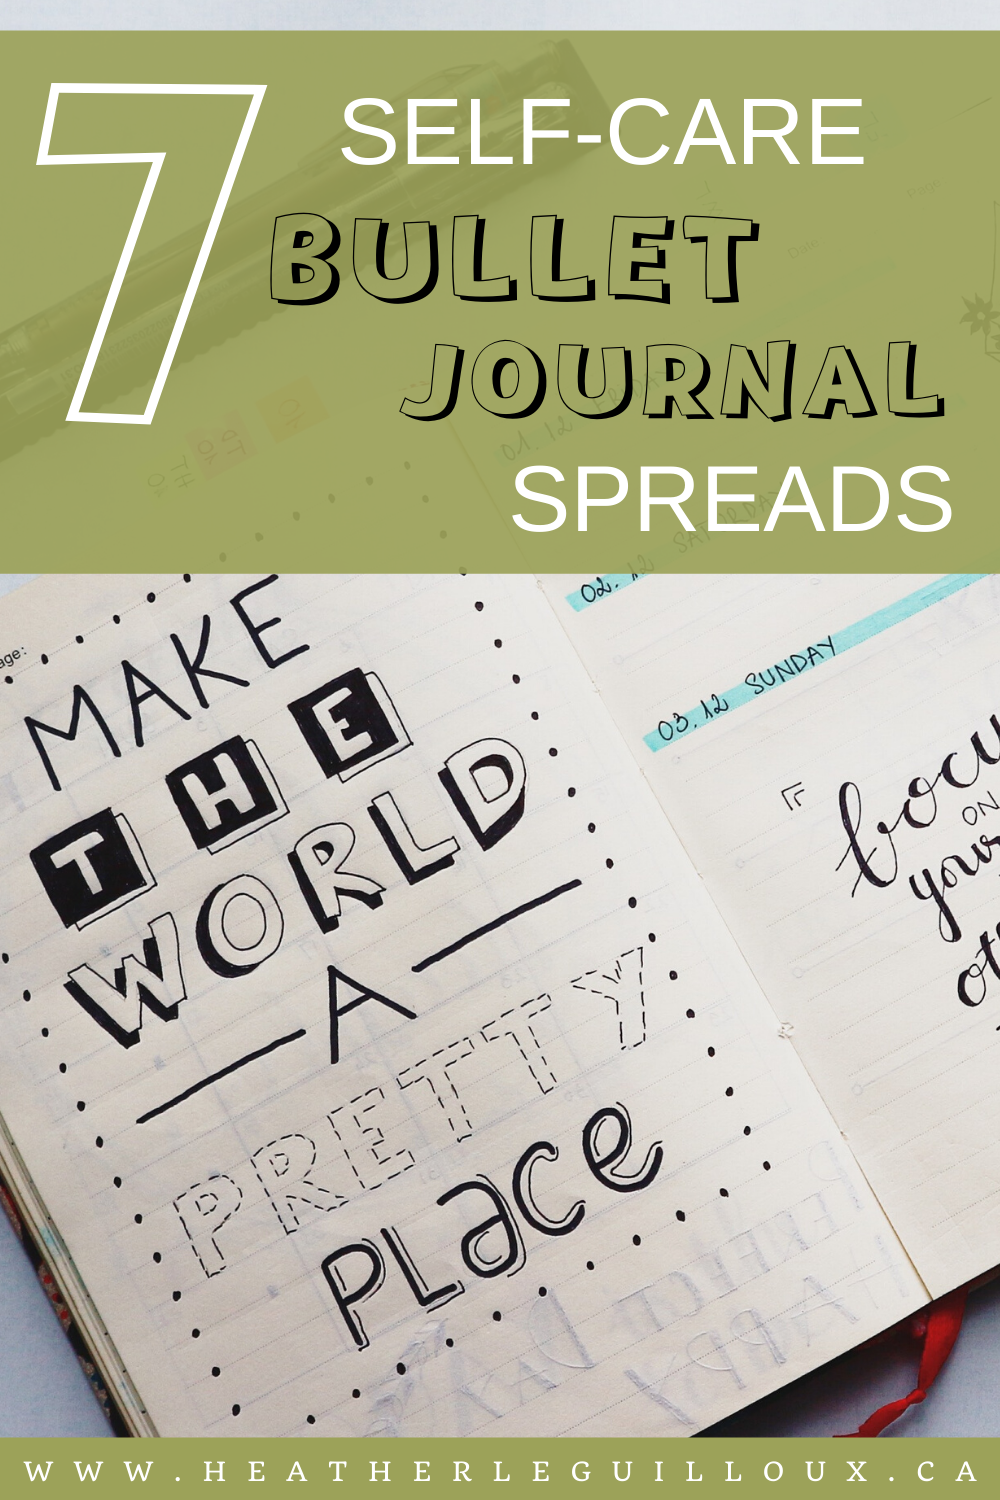 If you haven't jumped on the bullet journal bandwagon yet... what are you waiting for?! Especially in a time when you might be spending a lot more time at home, allowing your creative juices to flow by creating unique and useful bullet journal spreads is a great way to spend your time in while being isolated from the rest of the world. The benefits of using a bullet journal on your mental health are undeniable. #bulletjournal #journaling #mentalhealth #selfcare #selflove #wellness